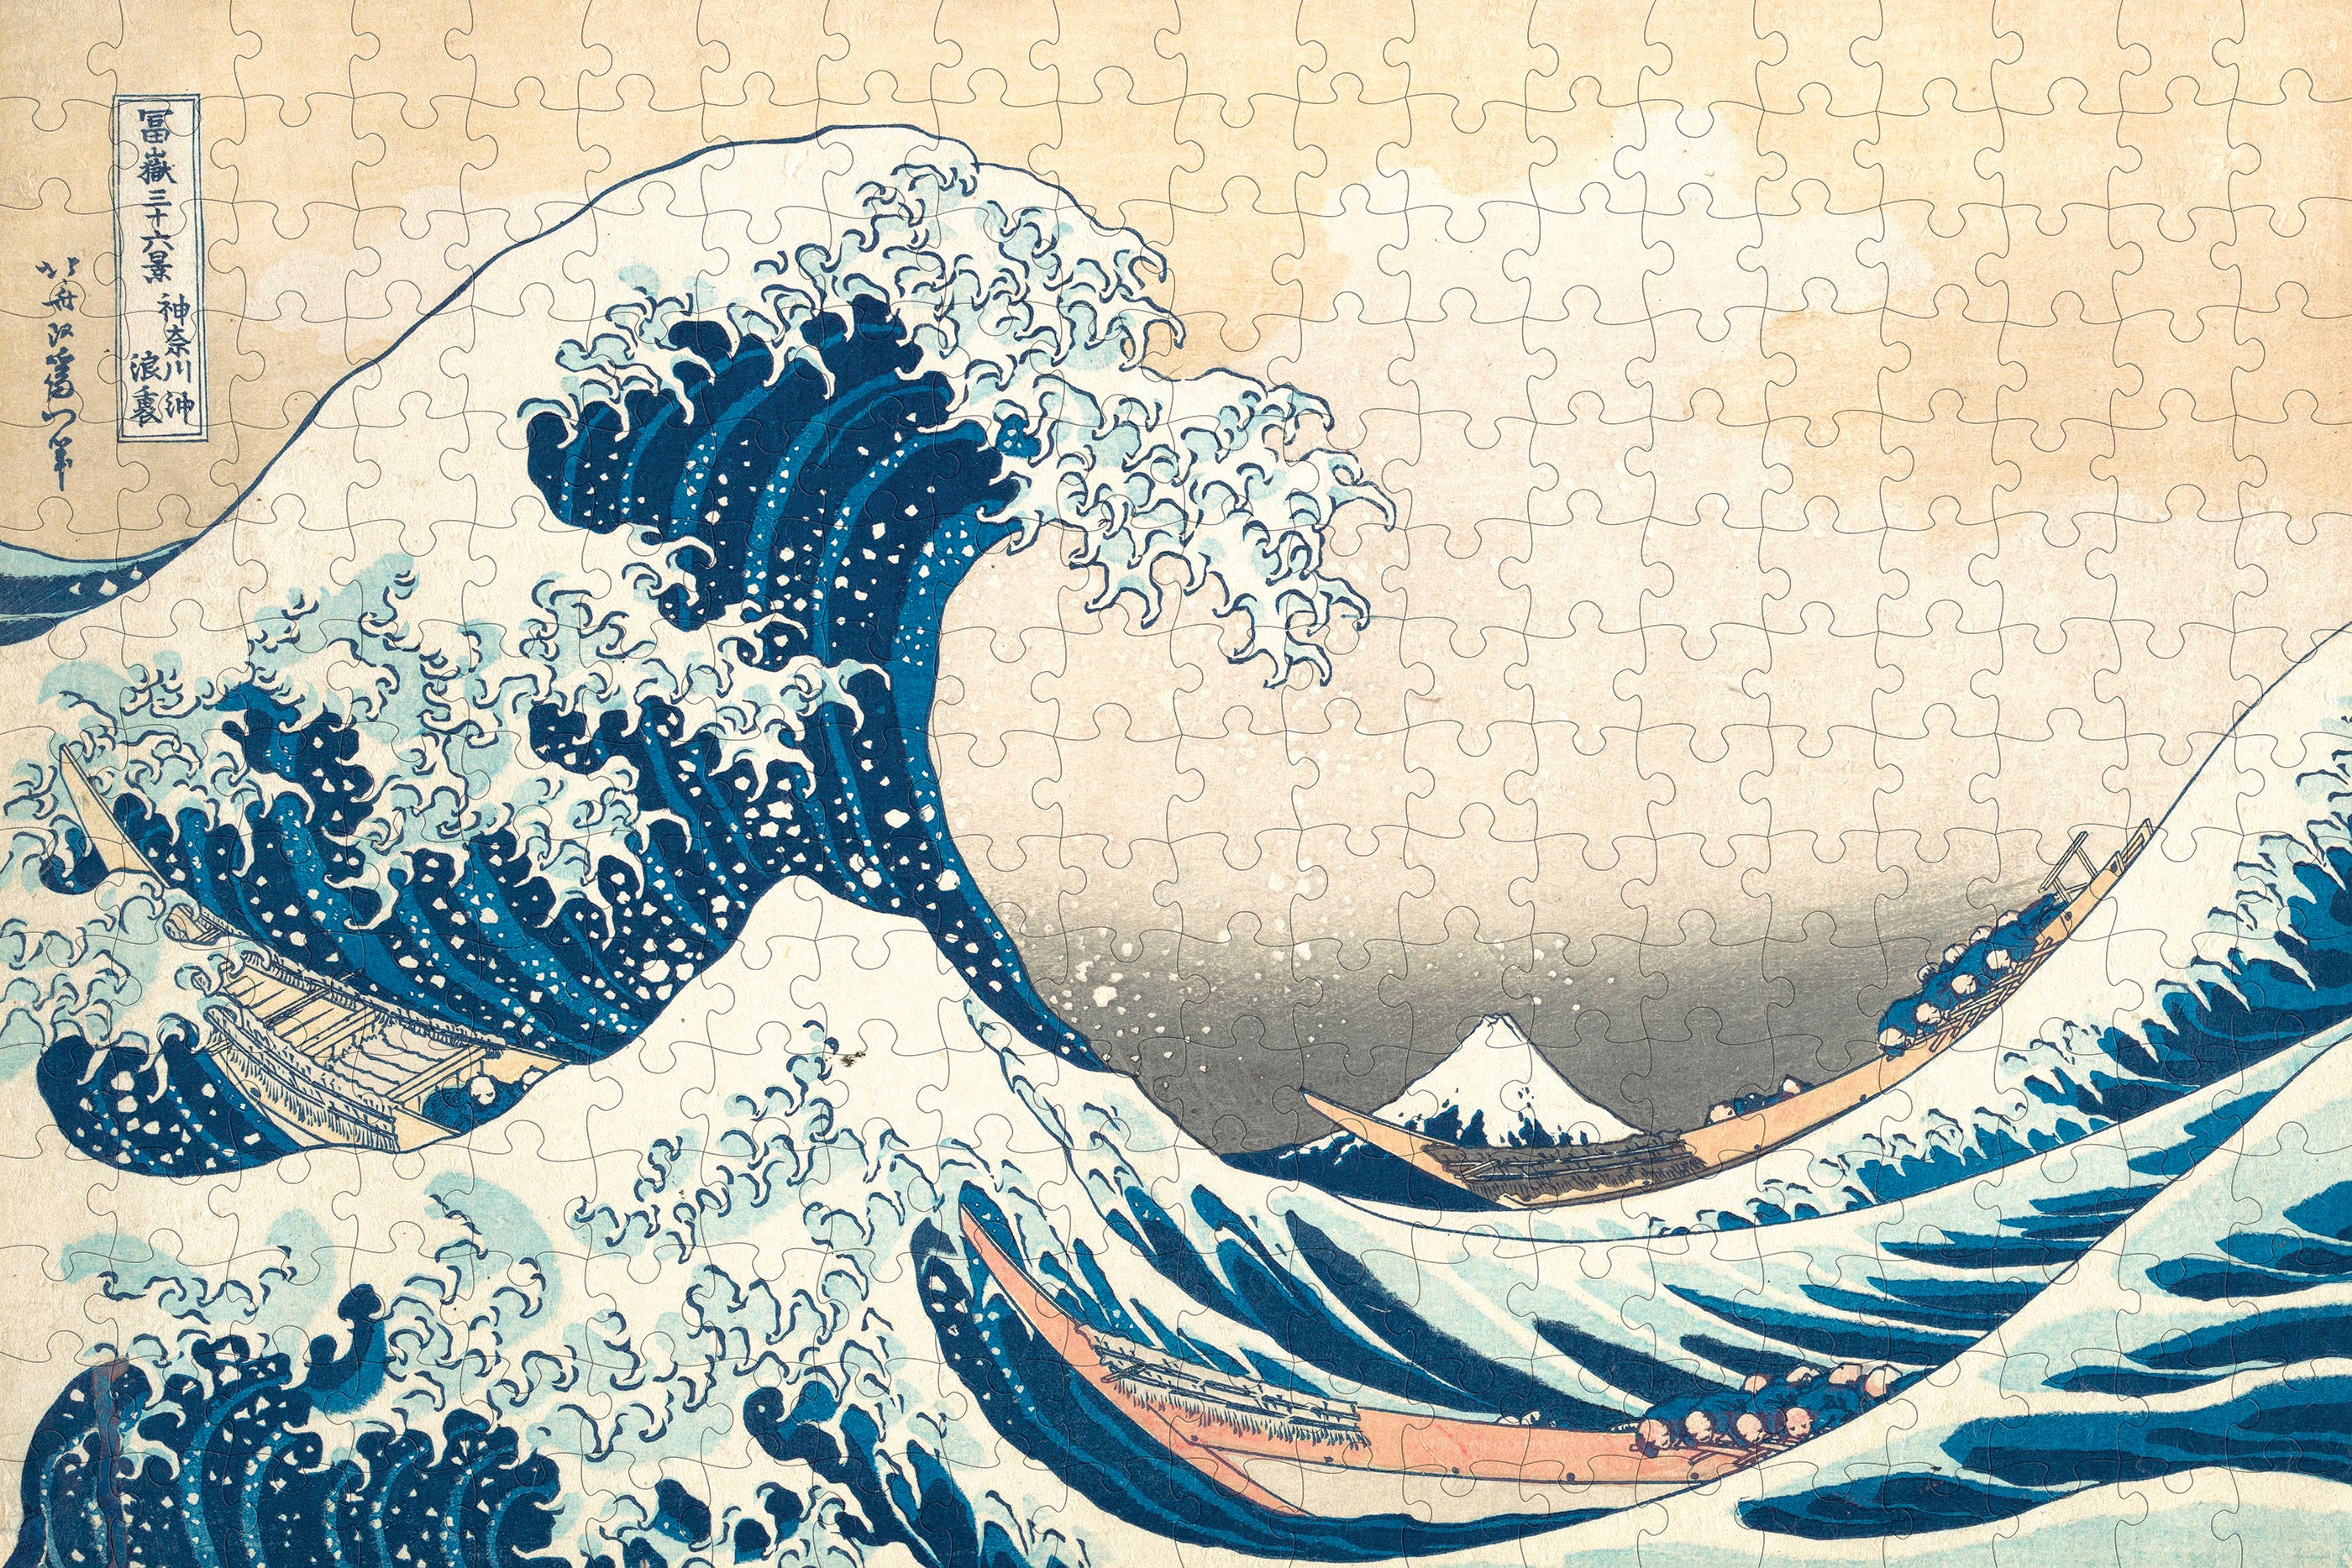 Hokusai "The Great Wave" 500-Piece Puzzle size is 27 by 18 inches.